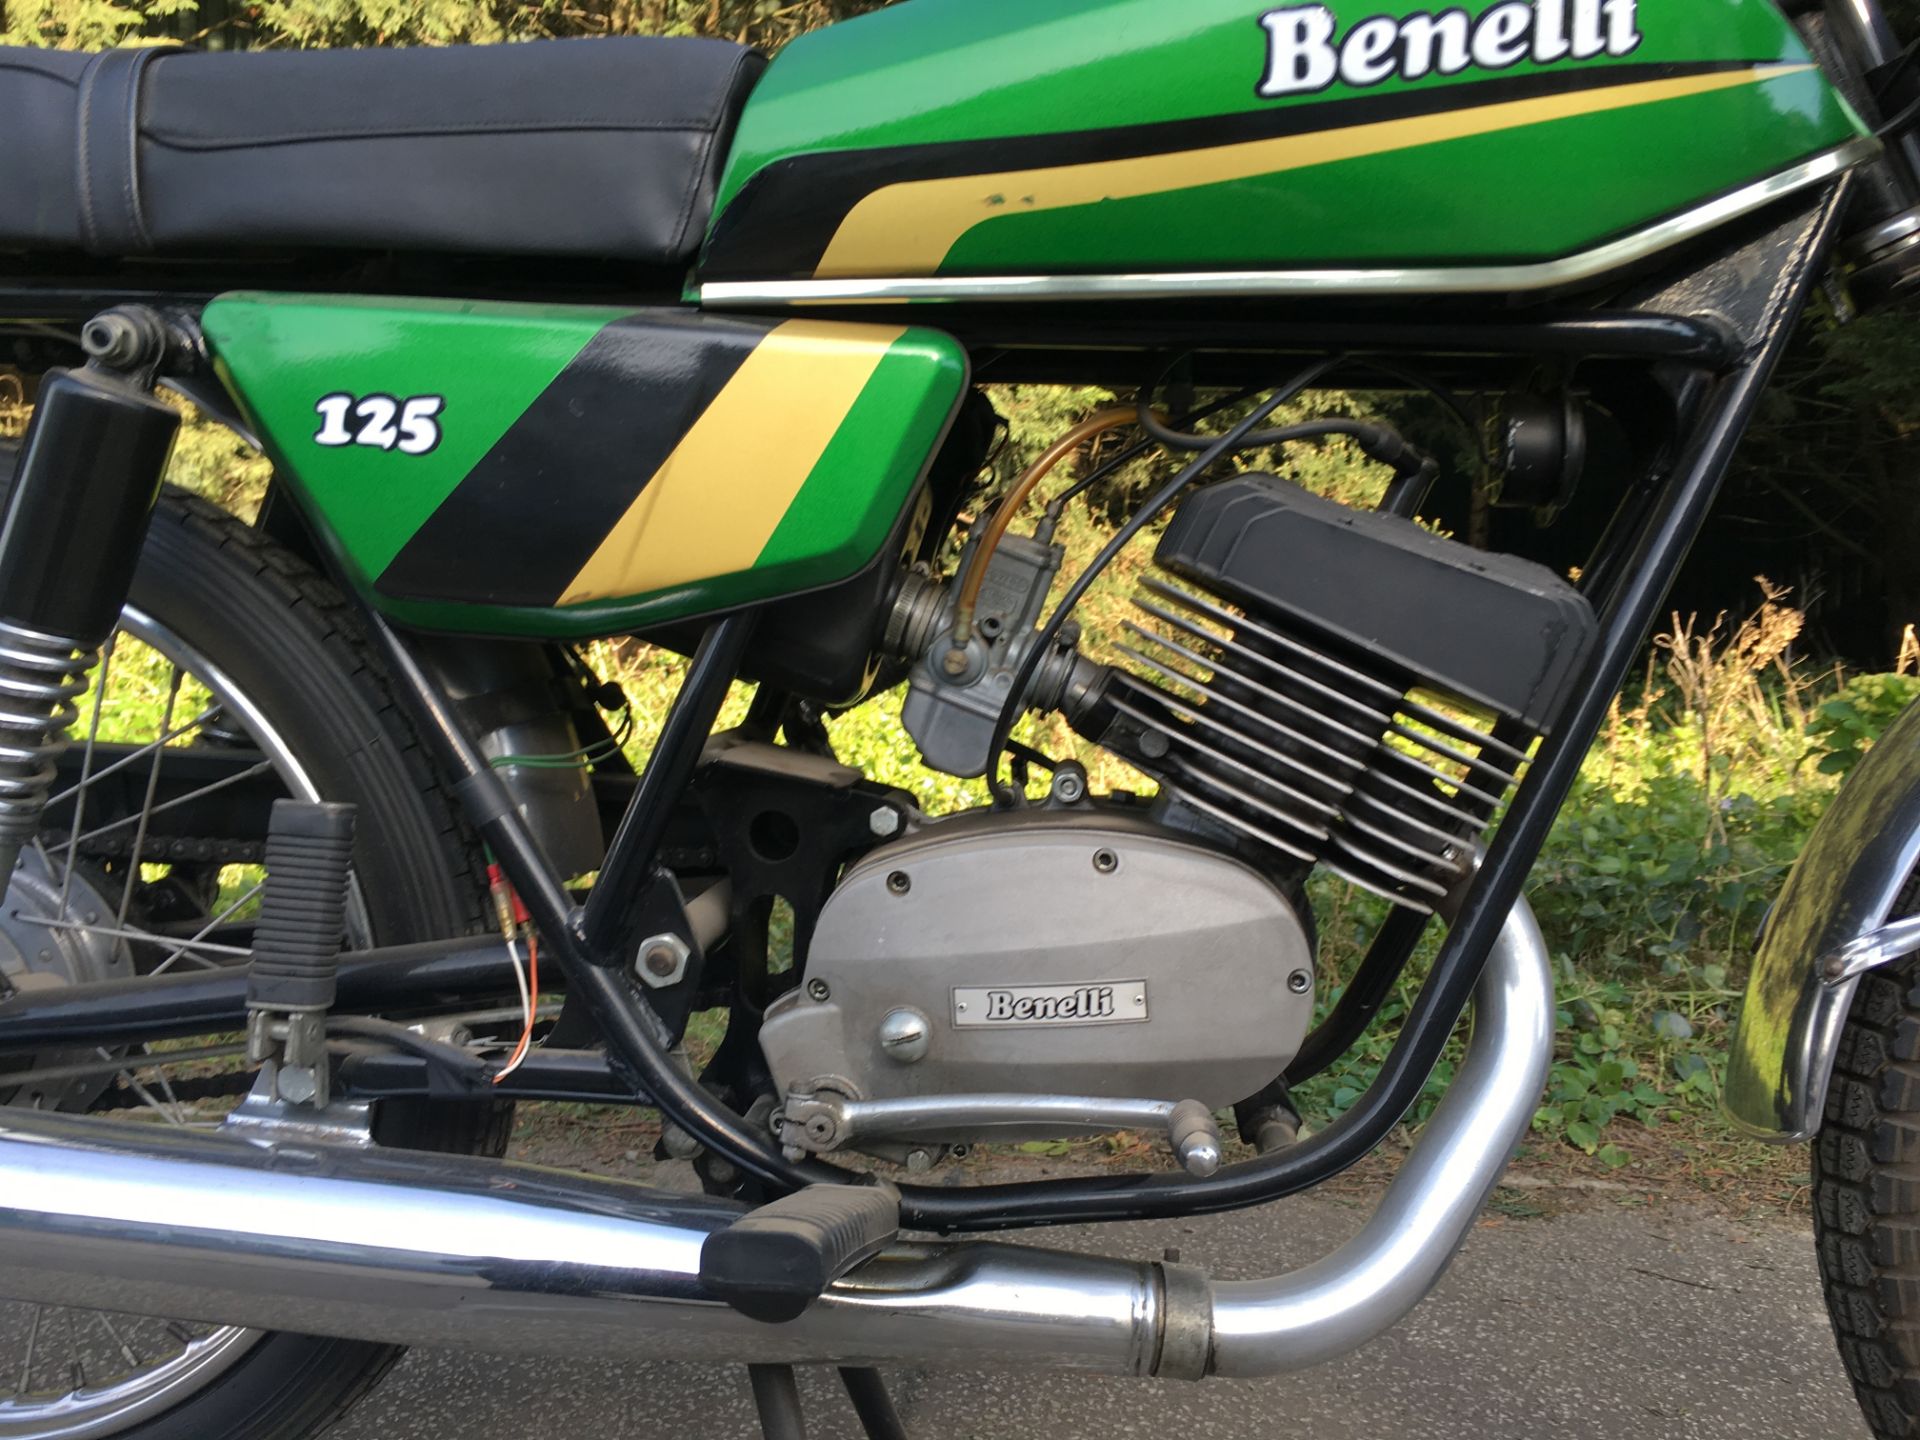 1978 Benelli 125s - Image 25 of 28